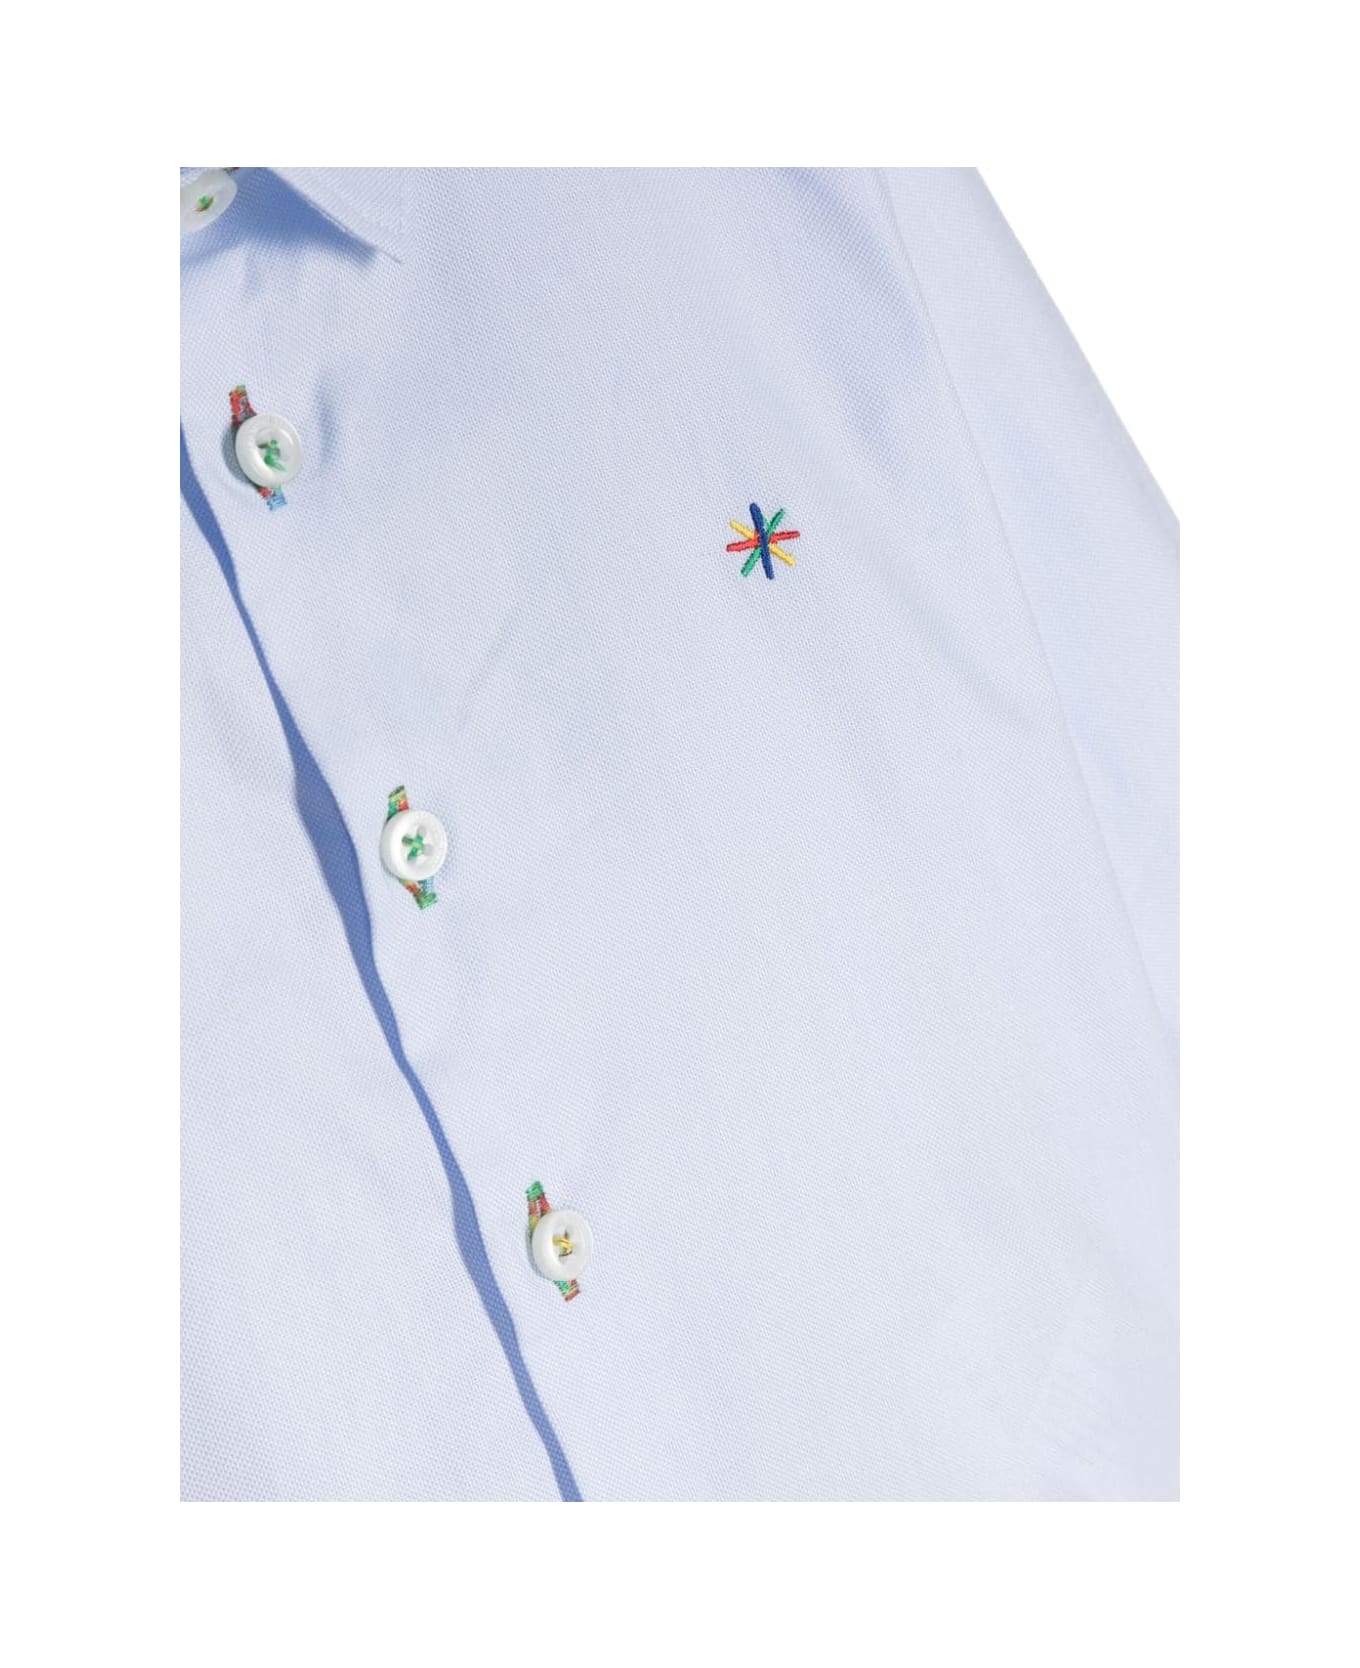 Manuel Ritz Shirt With Embroidery - Light blue